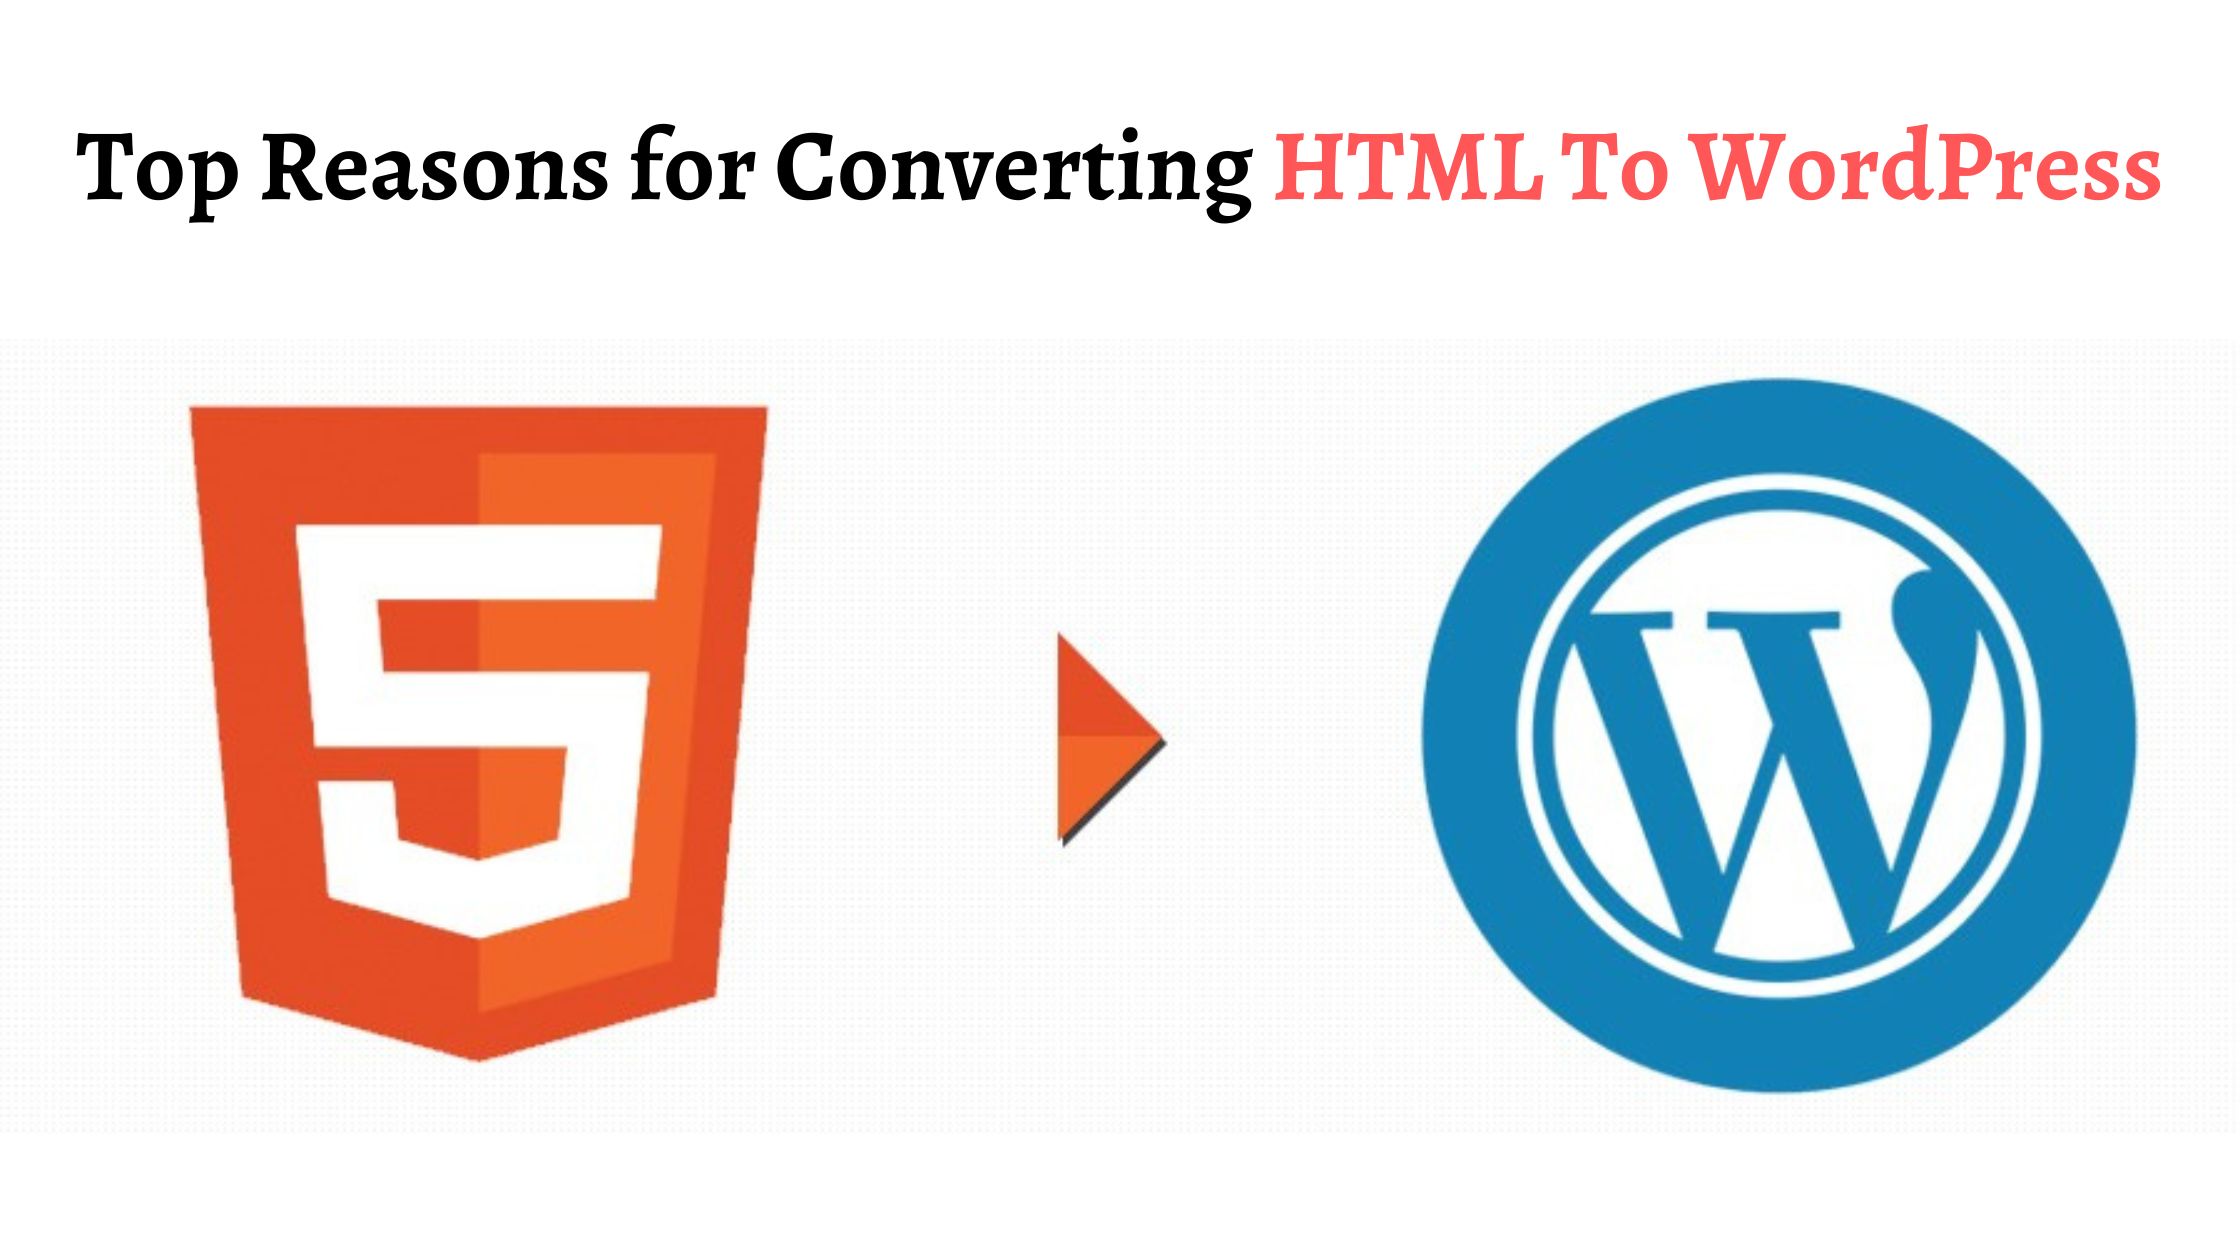 Top Reasons for Converting HTML To WordPress